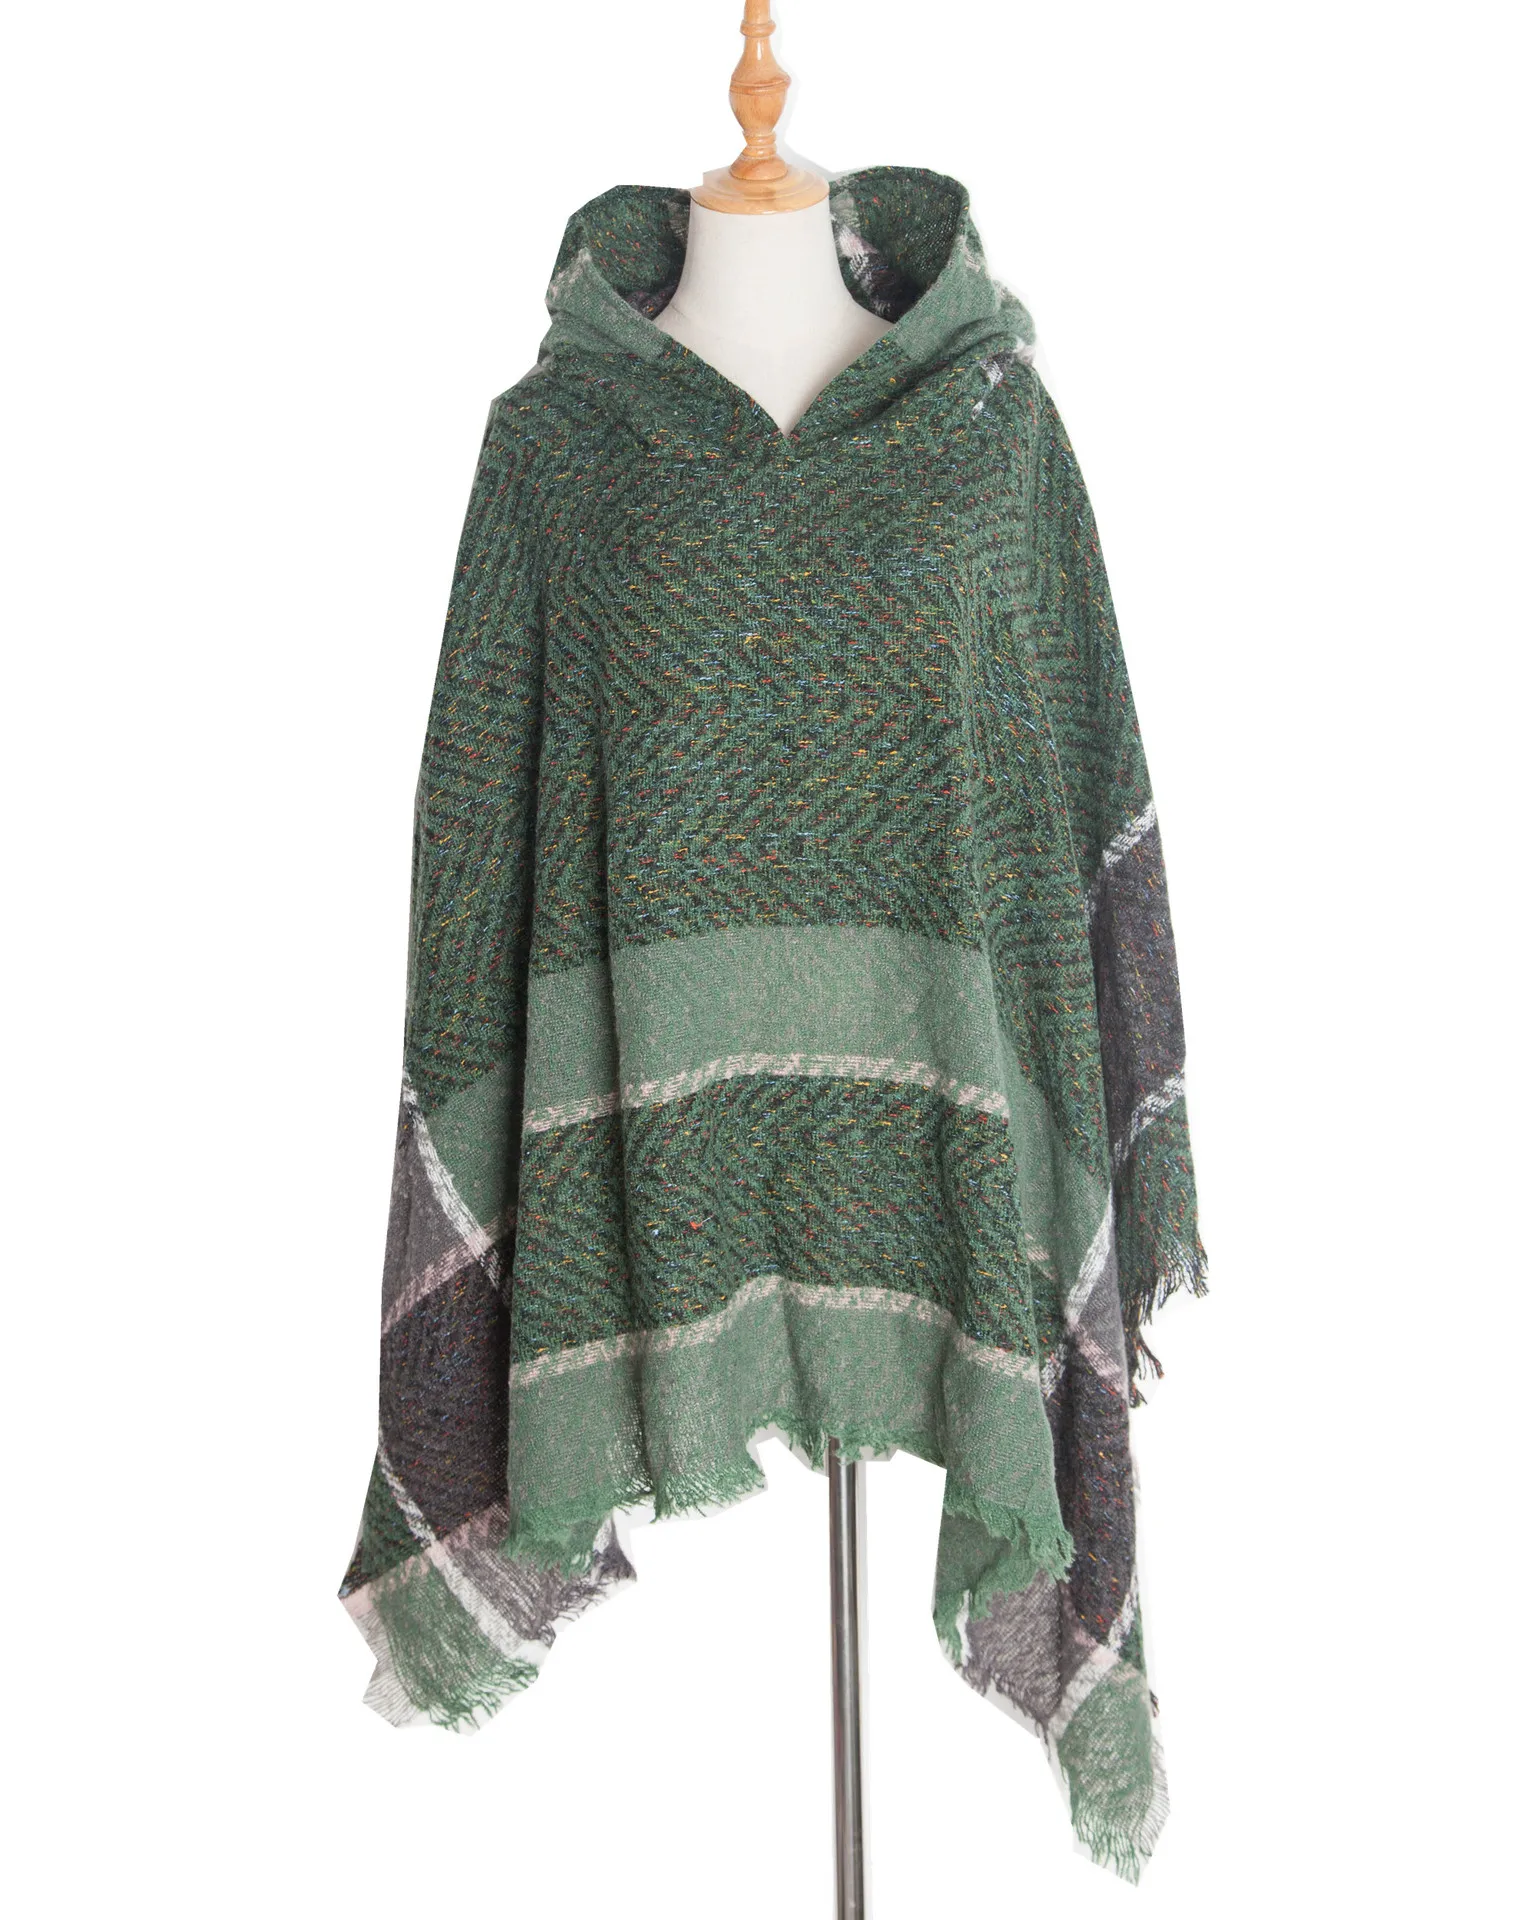 New Autumn Winter Fishbone Pattern Women's Hooded Cape Pullover Cape Women Poncho Lady Capes Green Cloaks